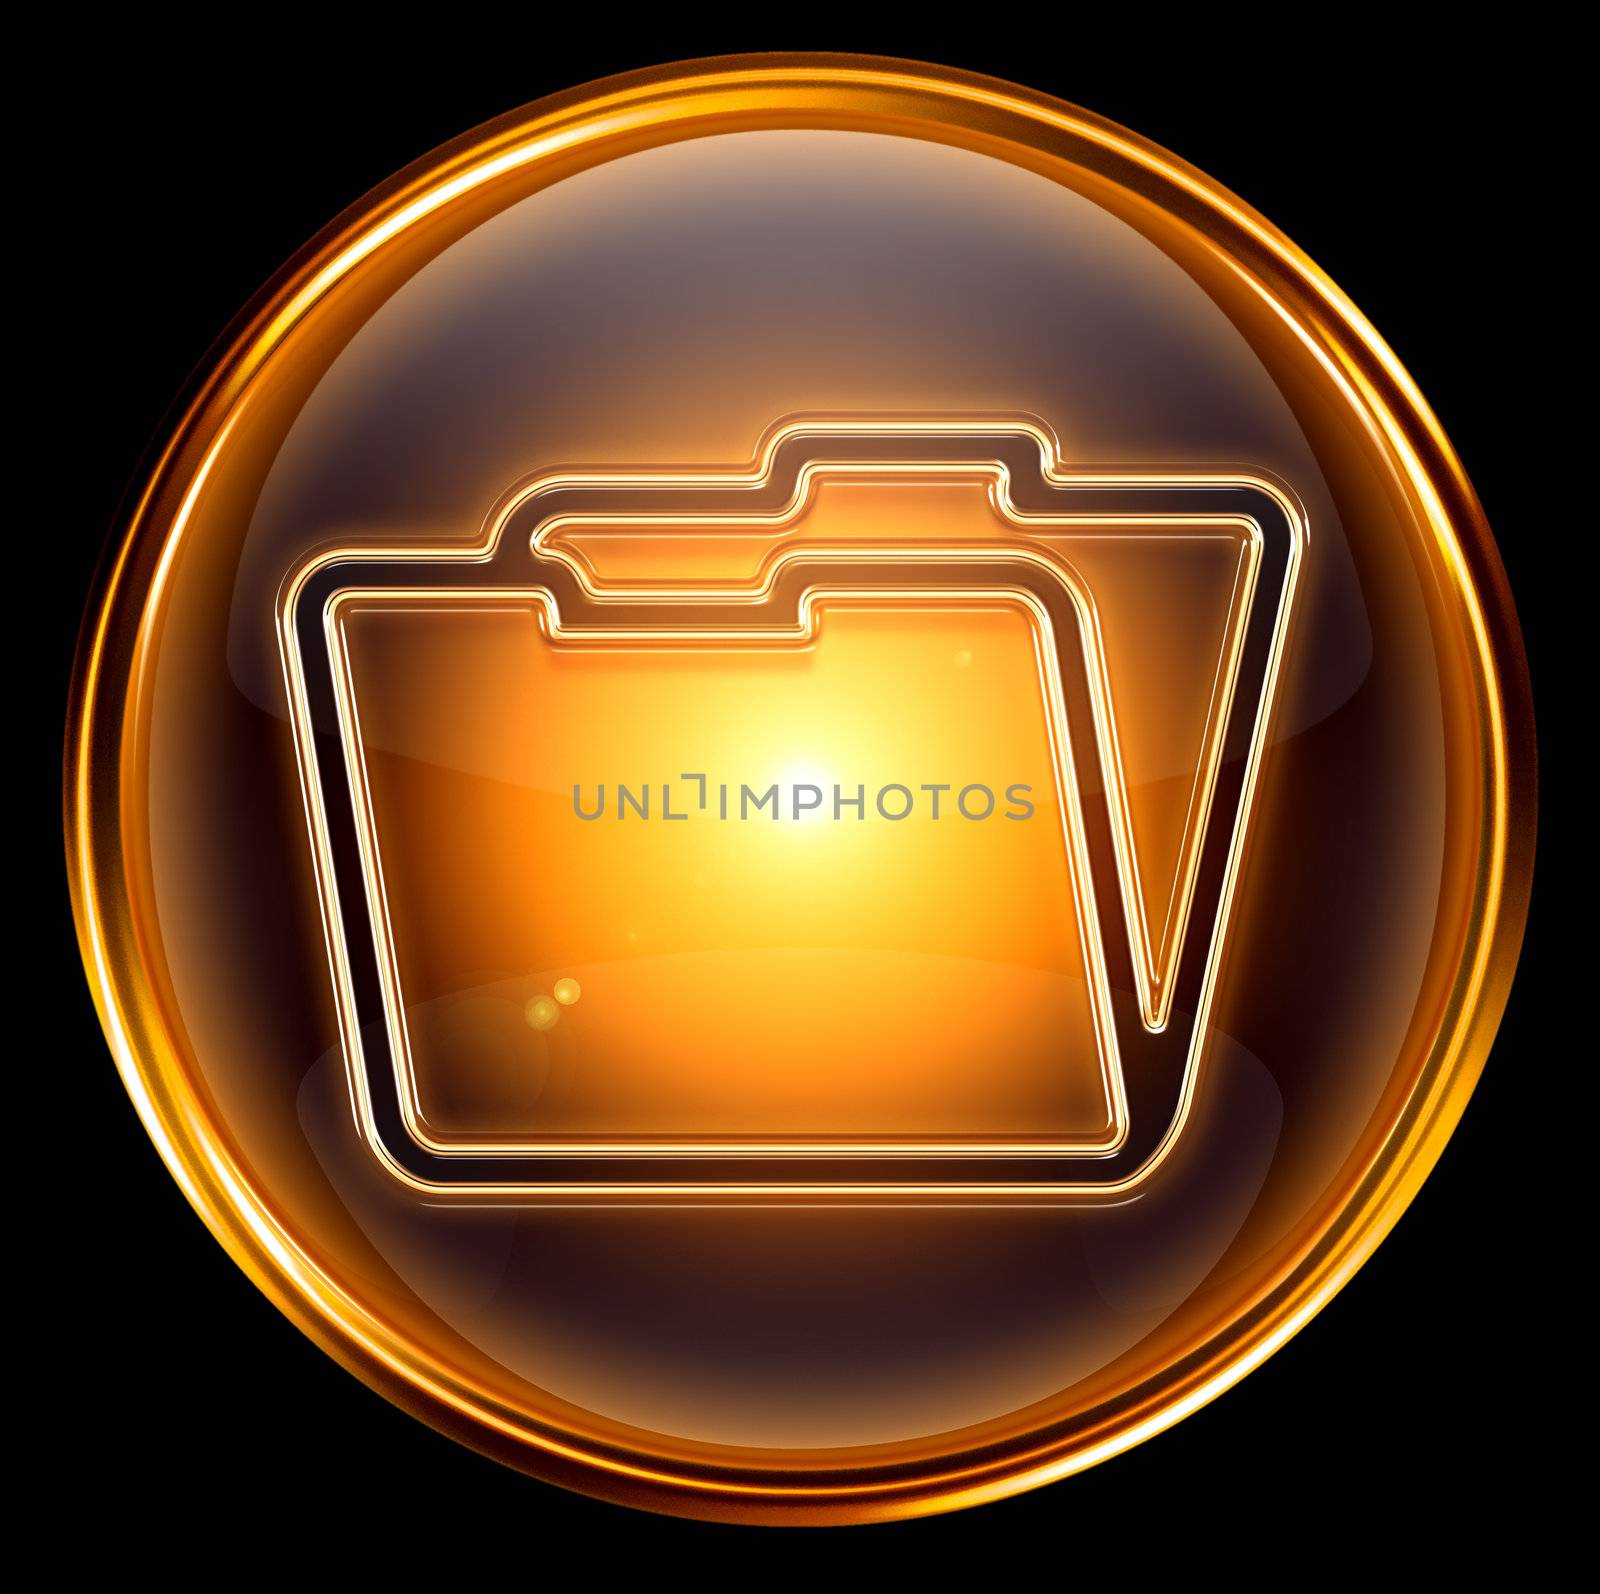 Folder icon gold, isolated on black background by zeffss